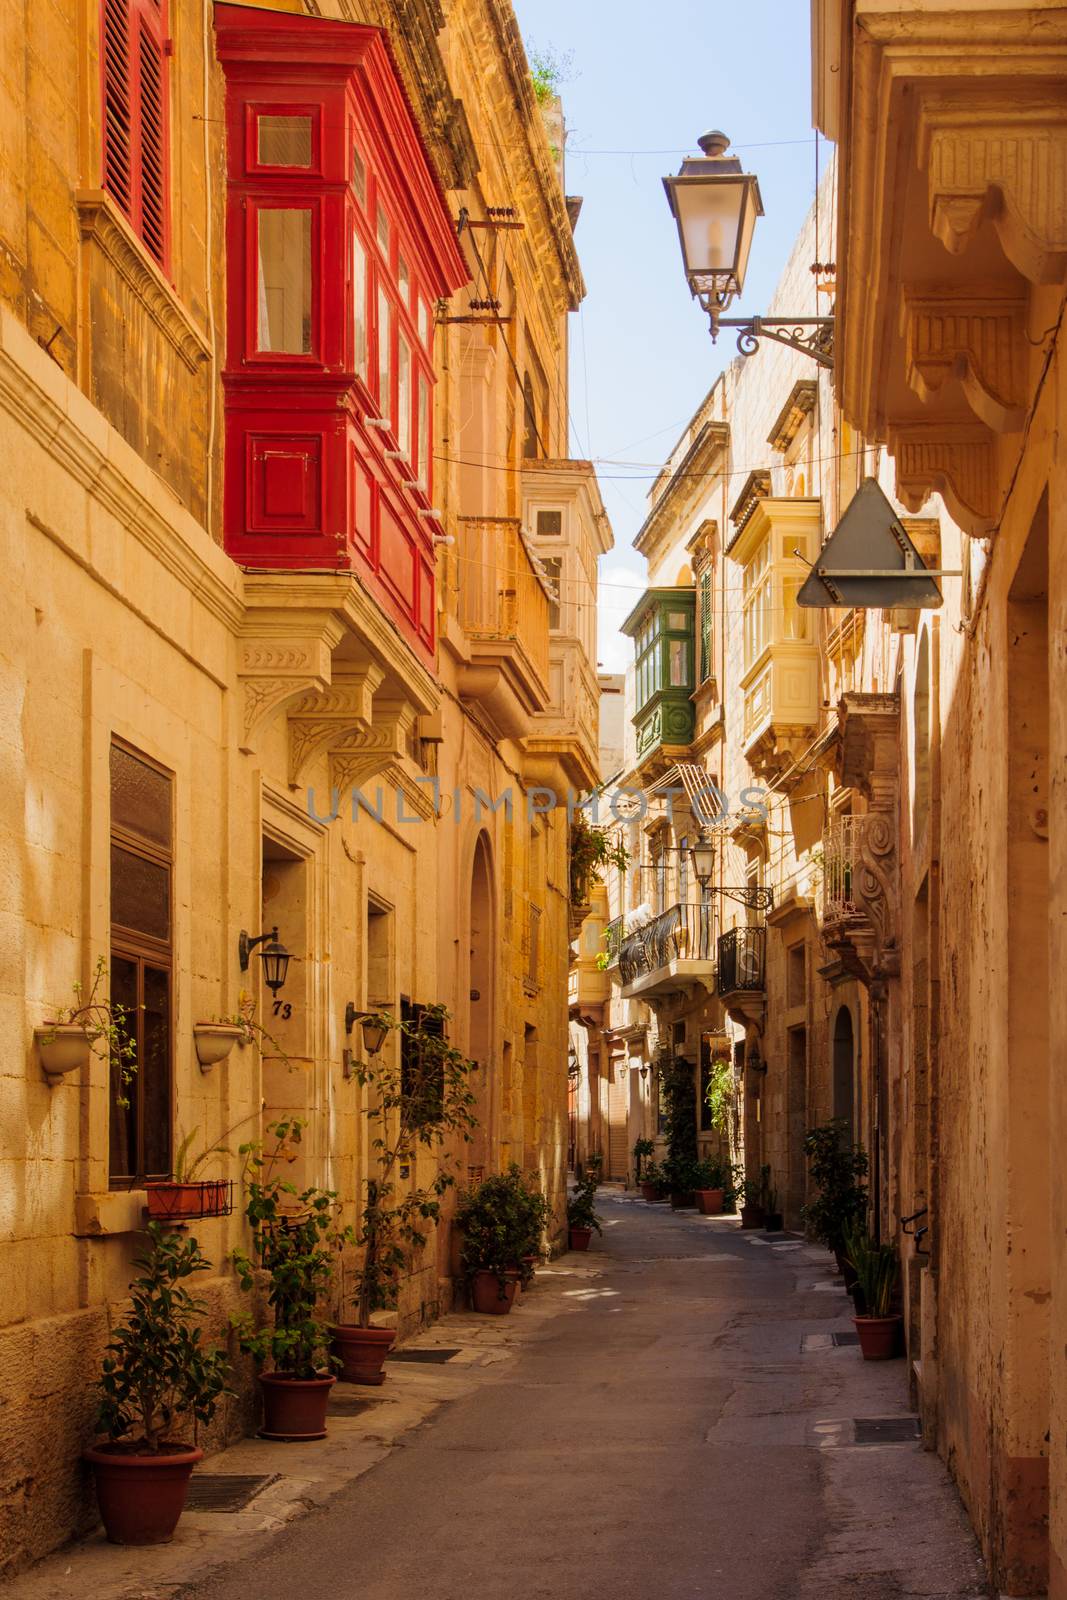 An alley in the three cities, Malta